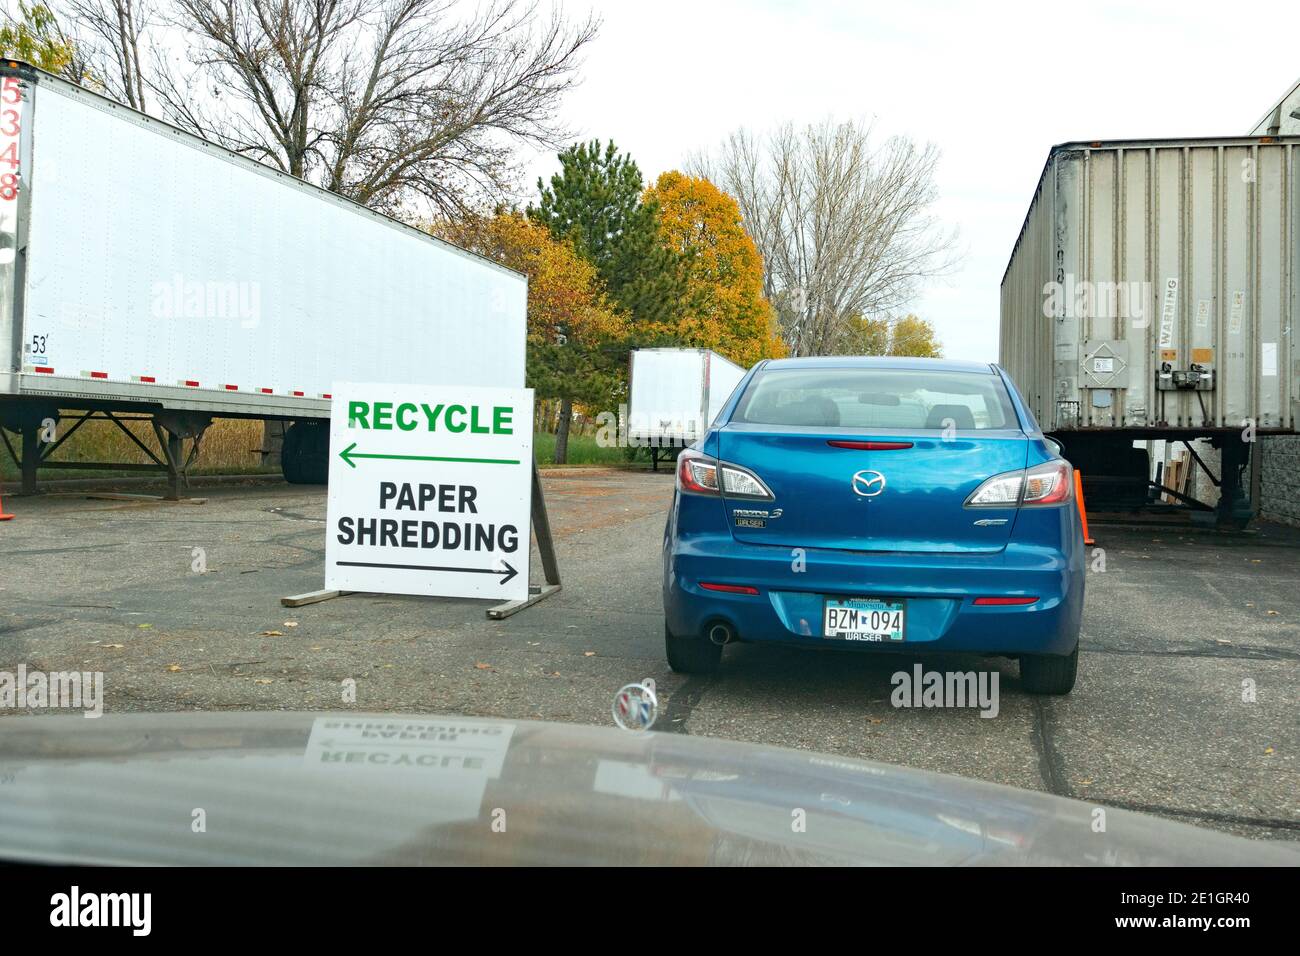 Directional sign with arrows for cars to recycle appliances, electronics or paper shredding on a community recycling day. Blaine Minnesota MN USA Stock Photo